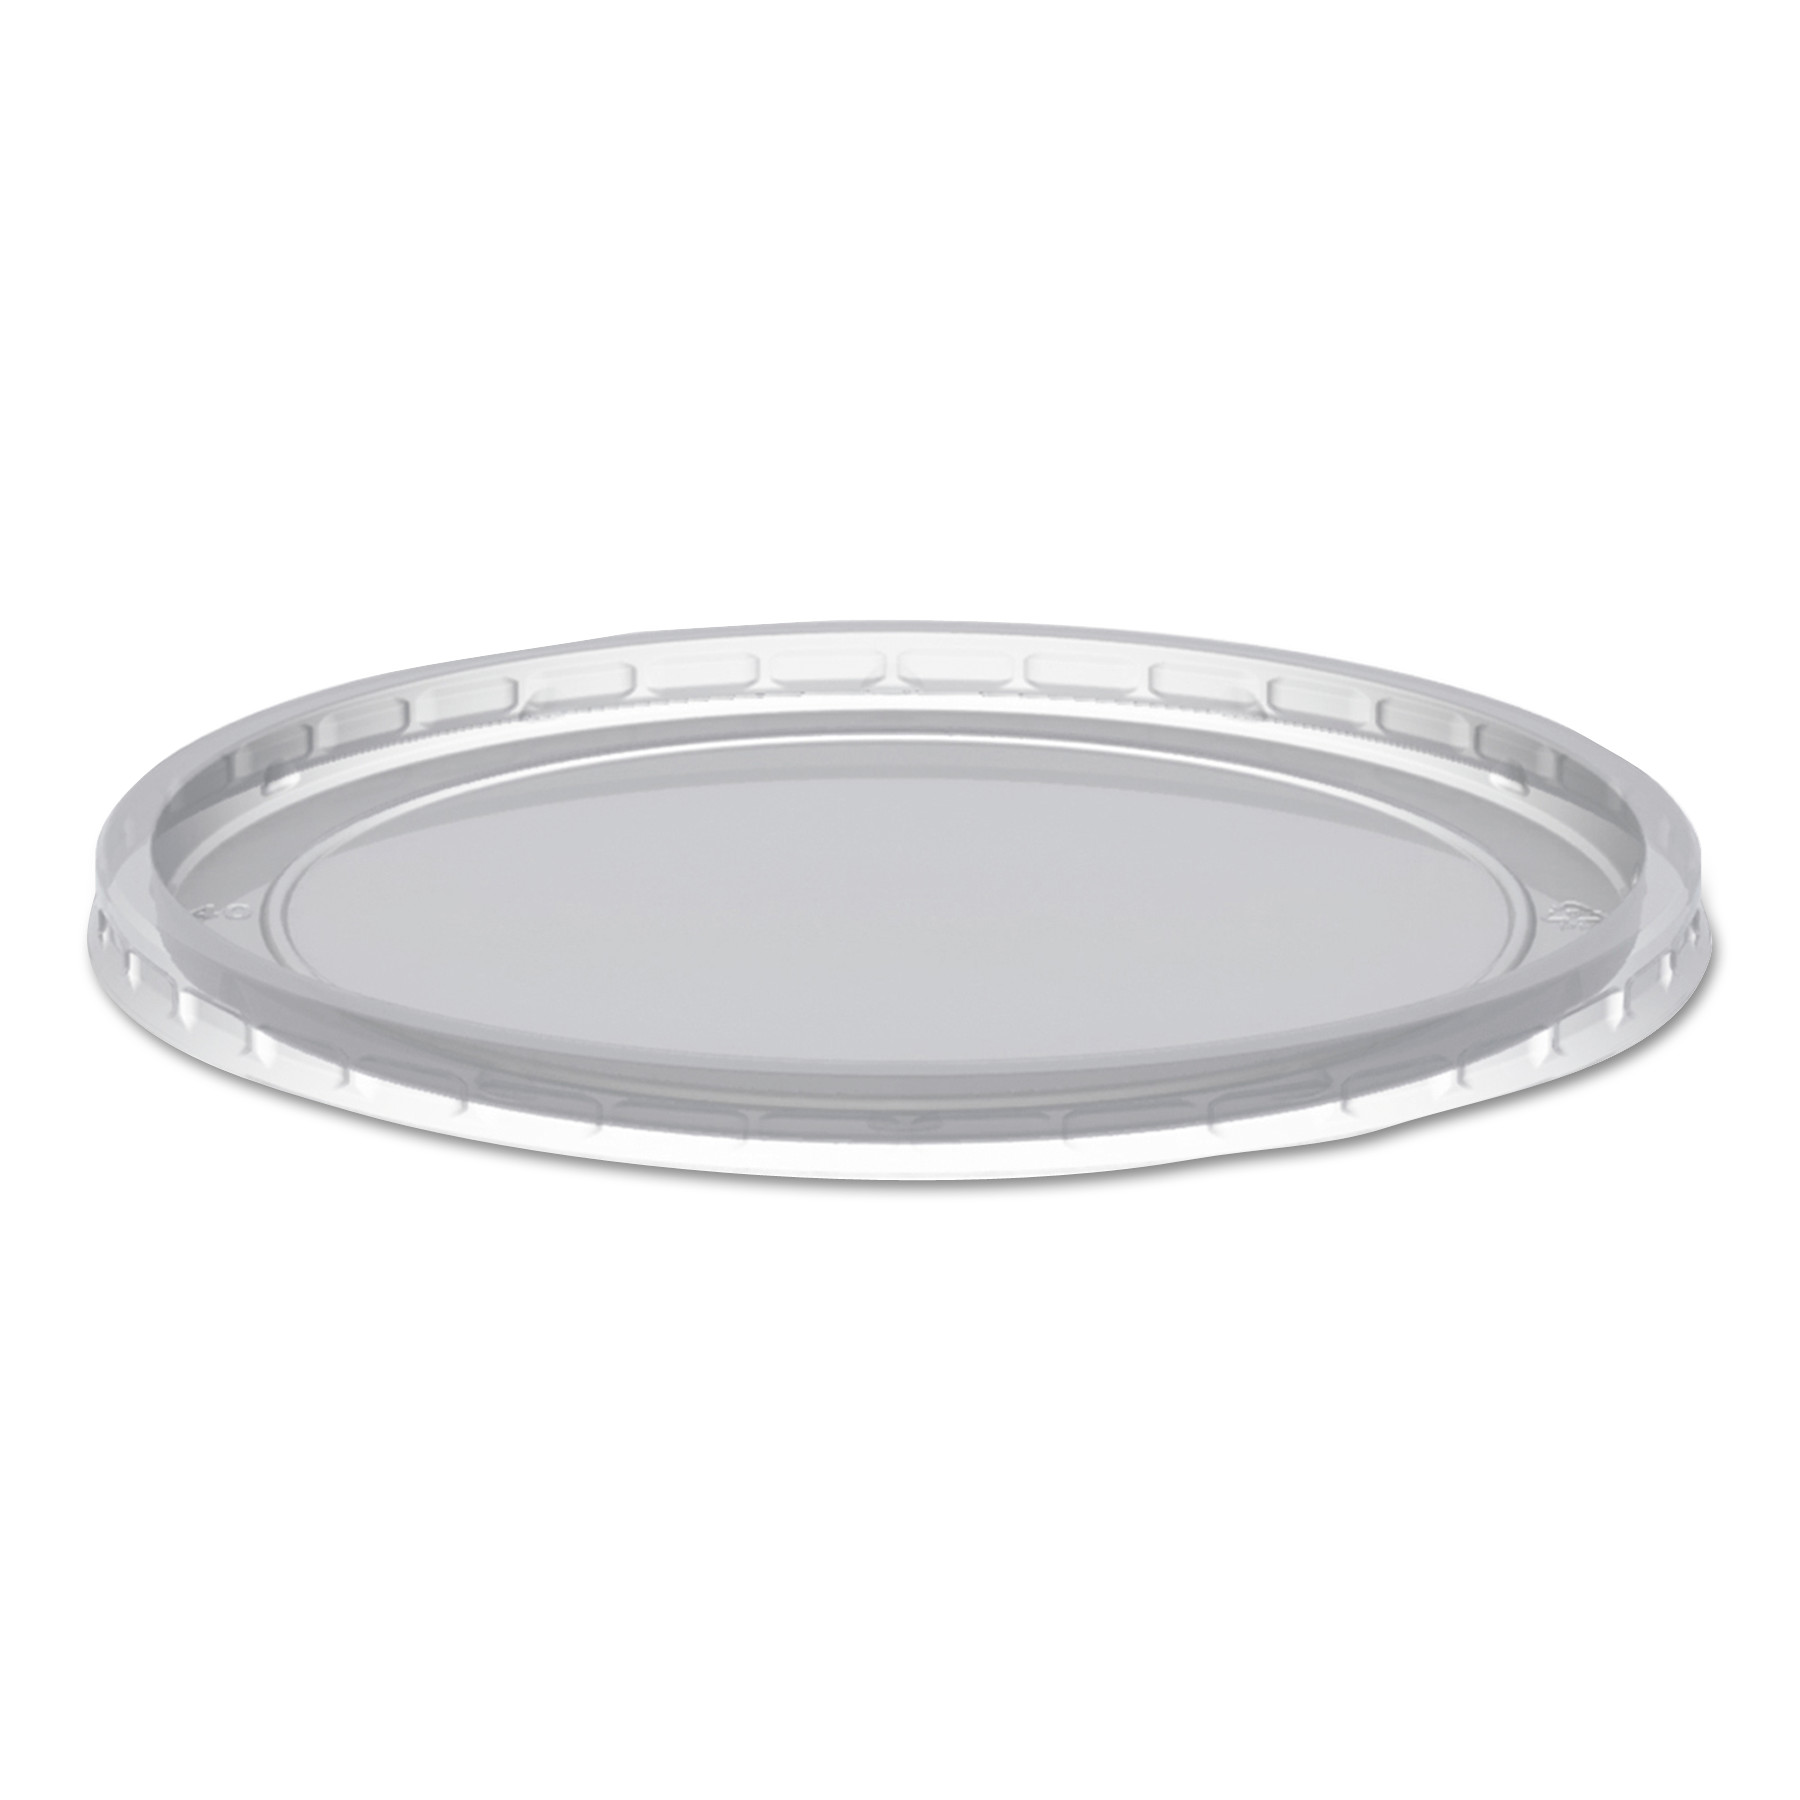  Anchor Packaging L409C MicroLite Deli Tub Lid, Clear, Inside-Cap Fit, Fits 8-32 oz Containers, 500/Carton (ANZL409C) 